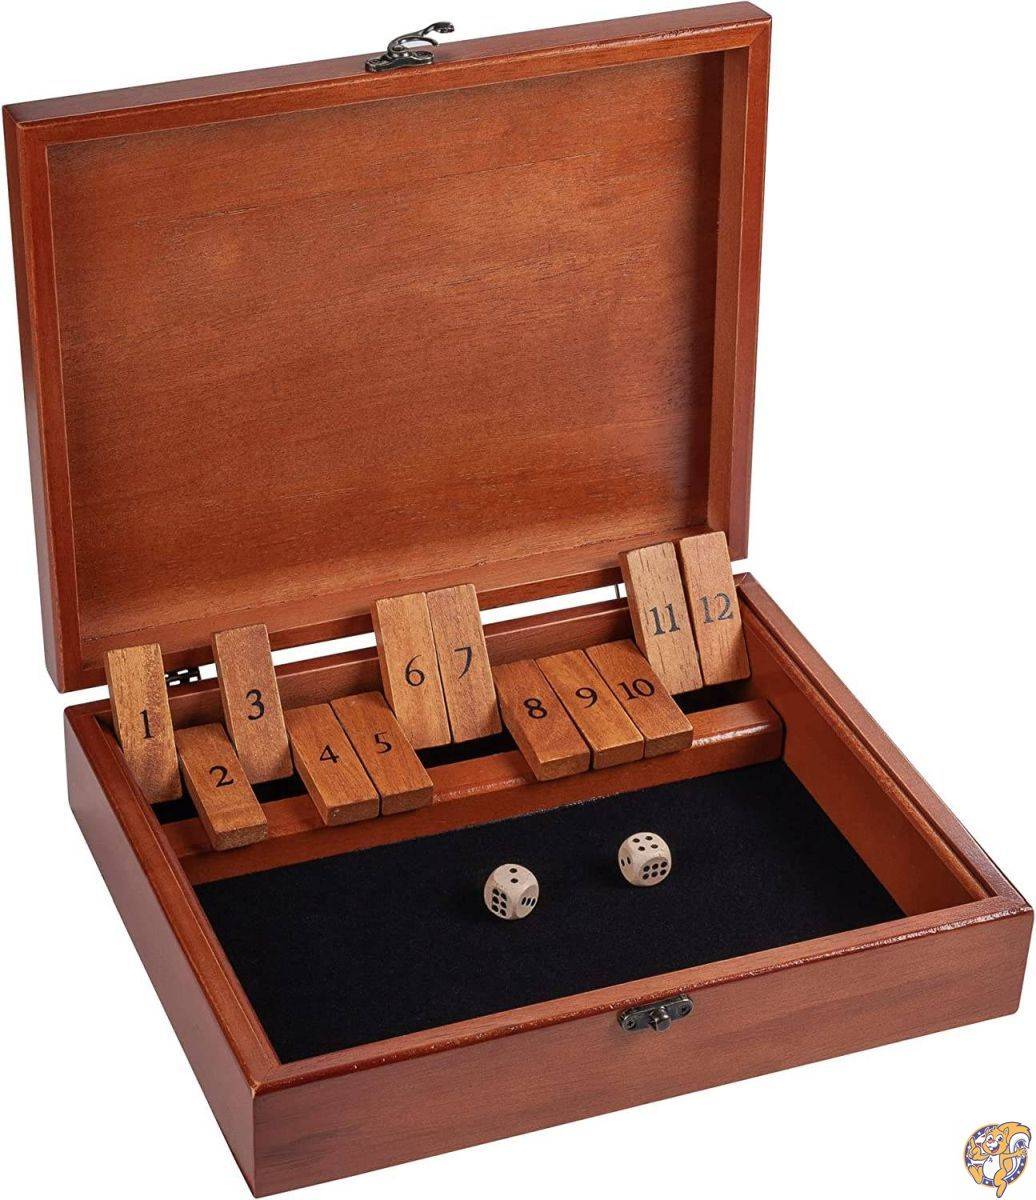 WE Games Shut the Box Game with 12 Numbers in an Old World Styled Wood